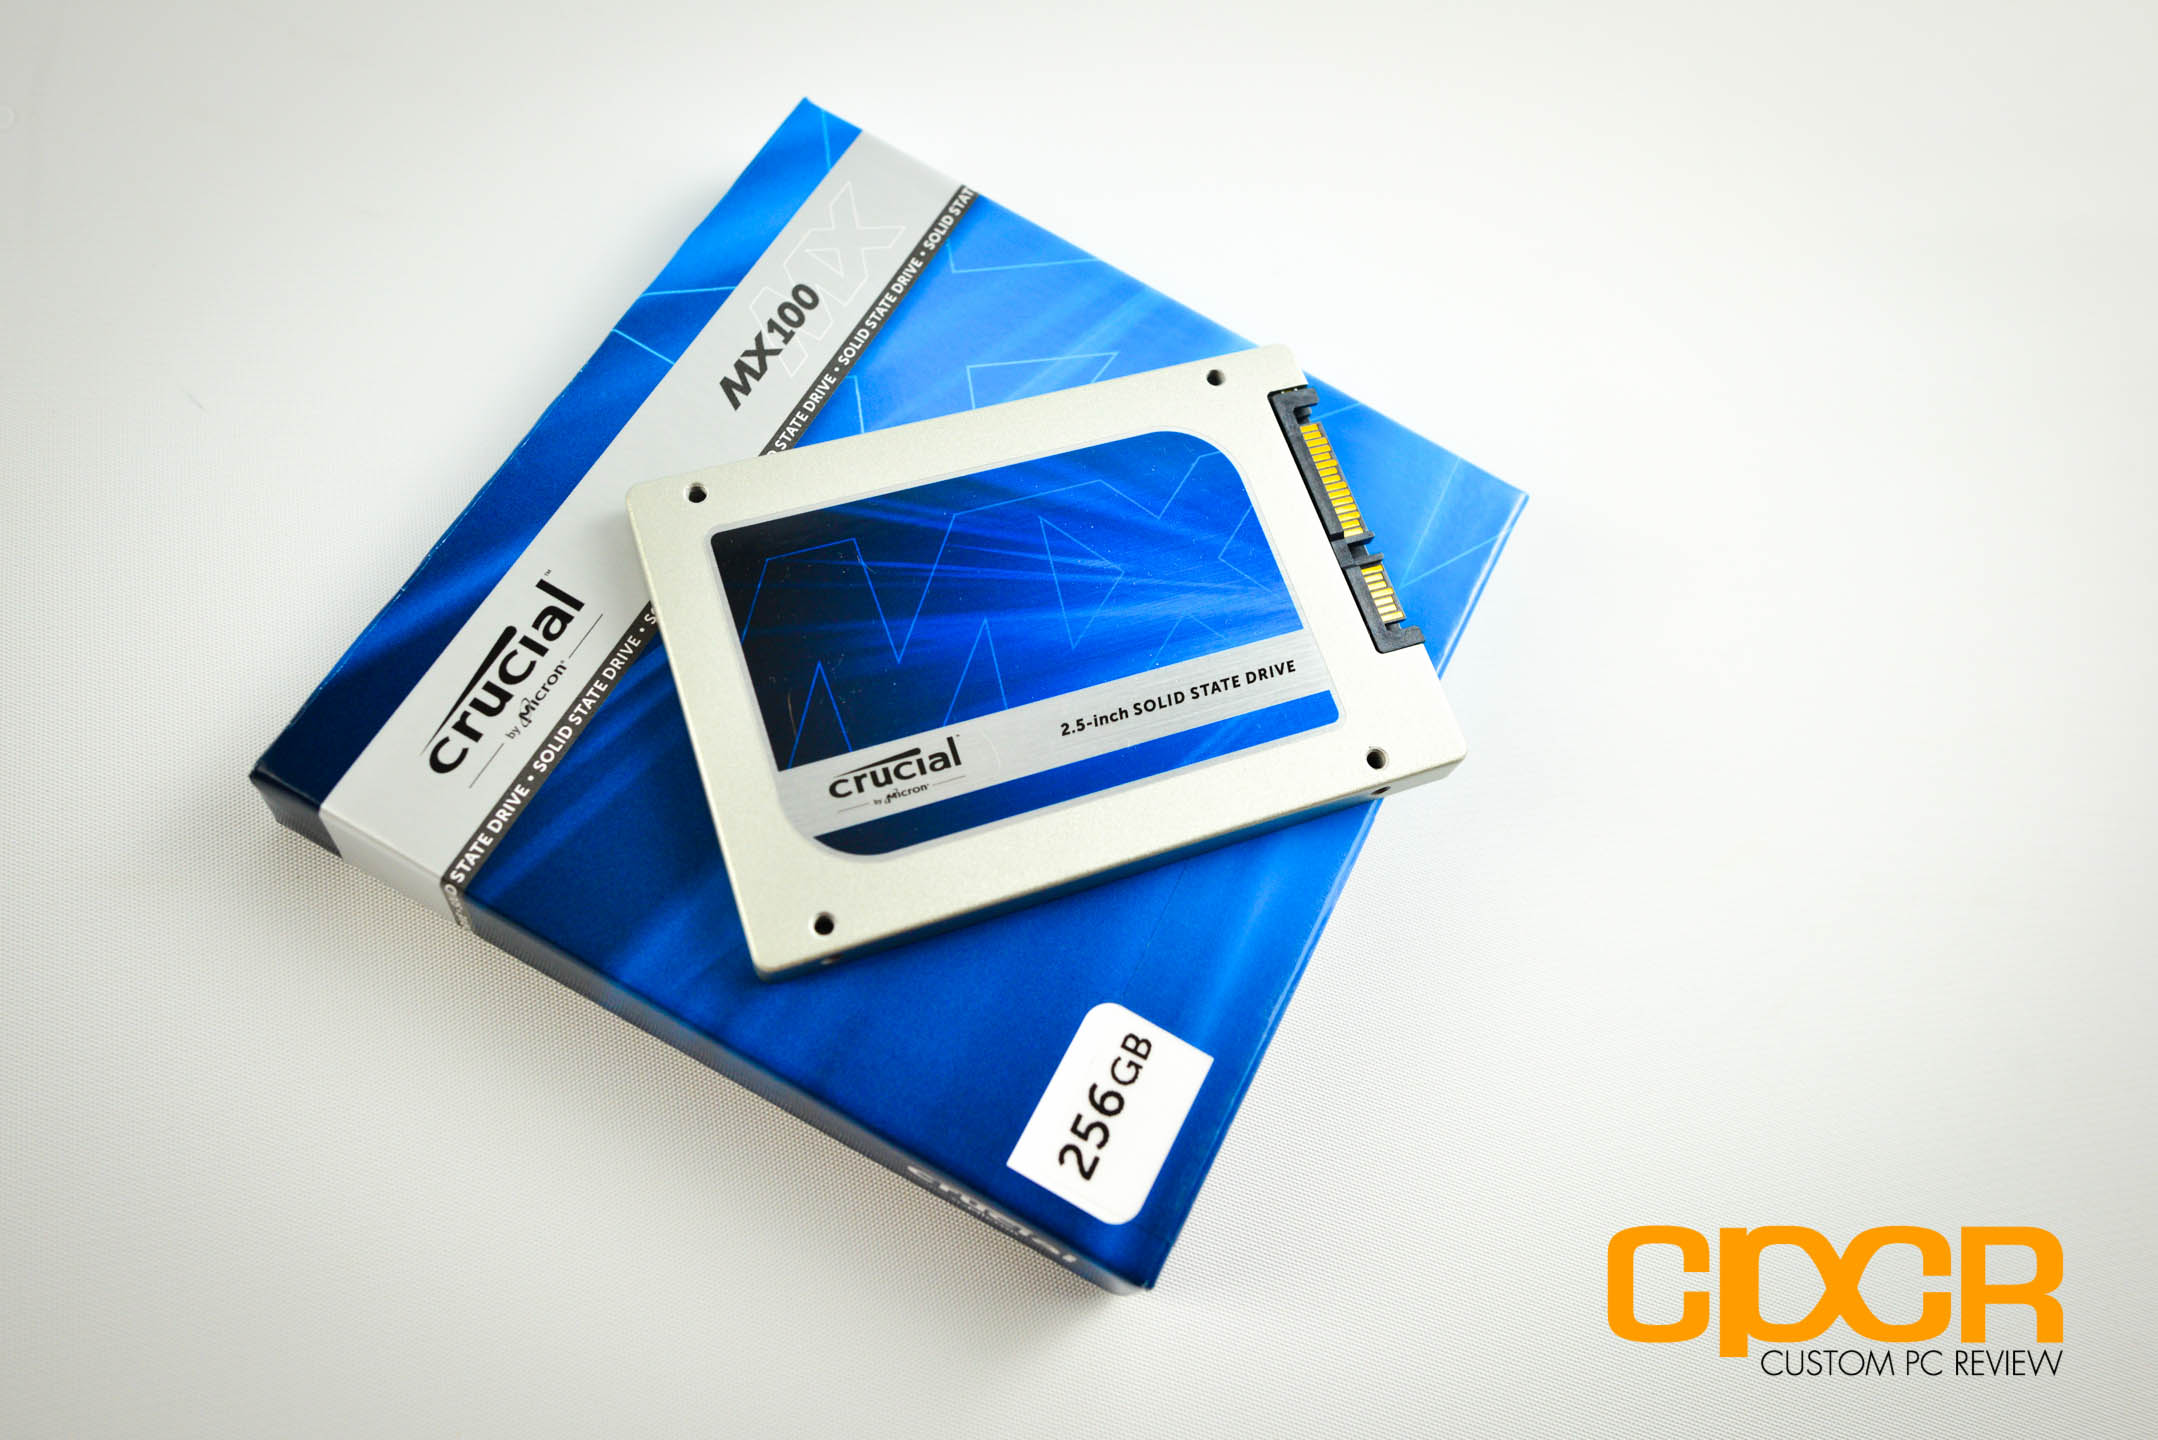 Review: Crucial MX100 256GB SSD